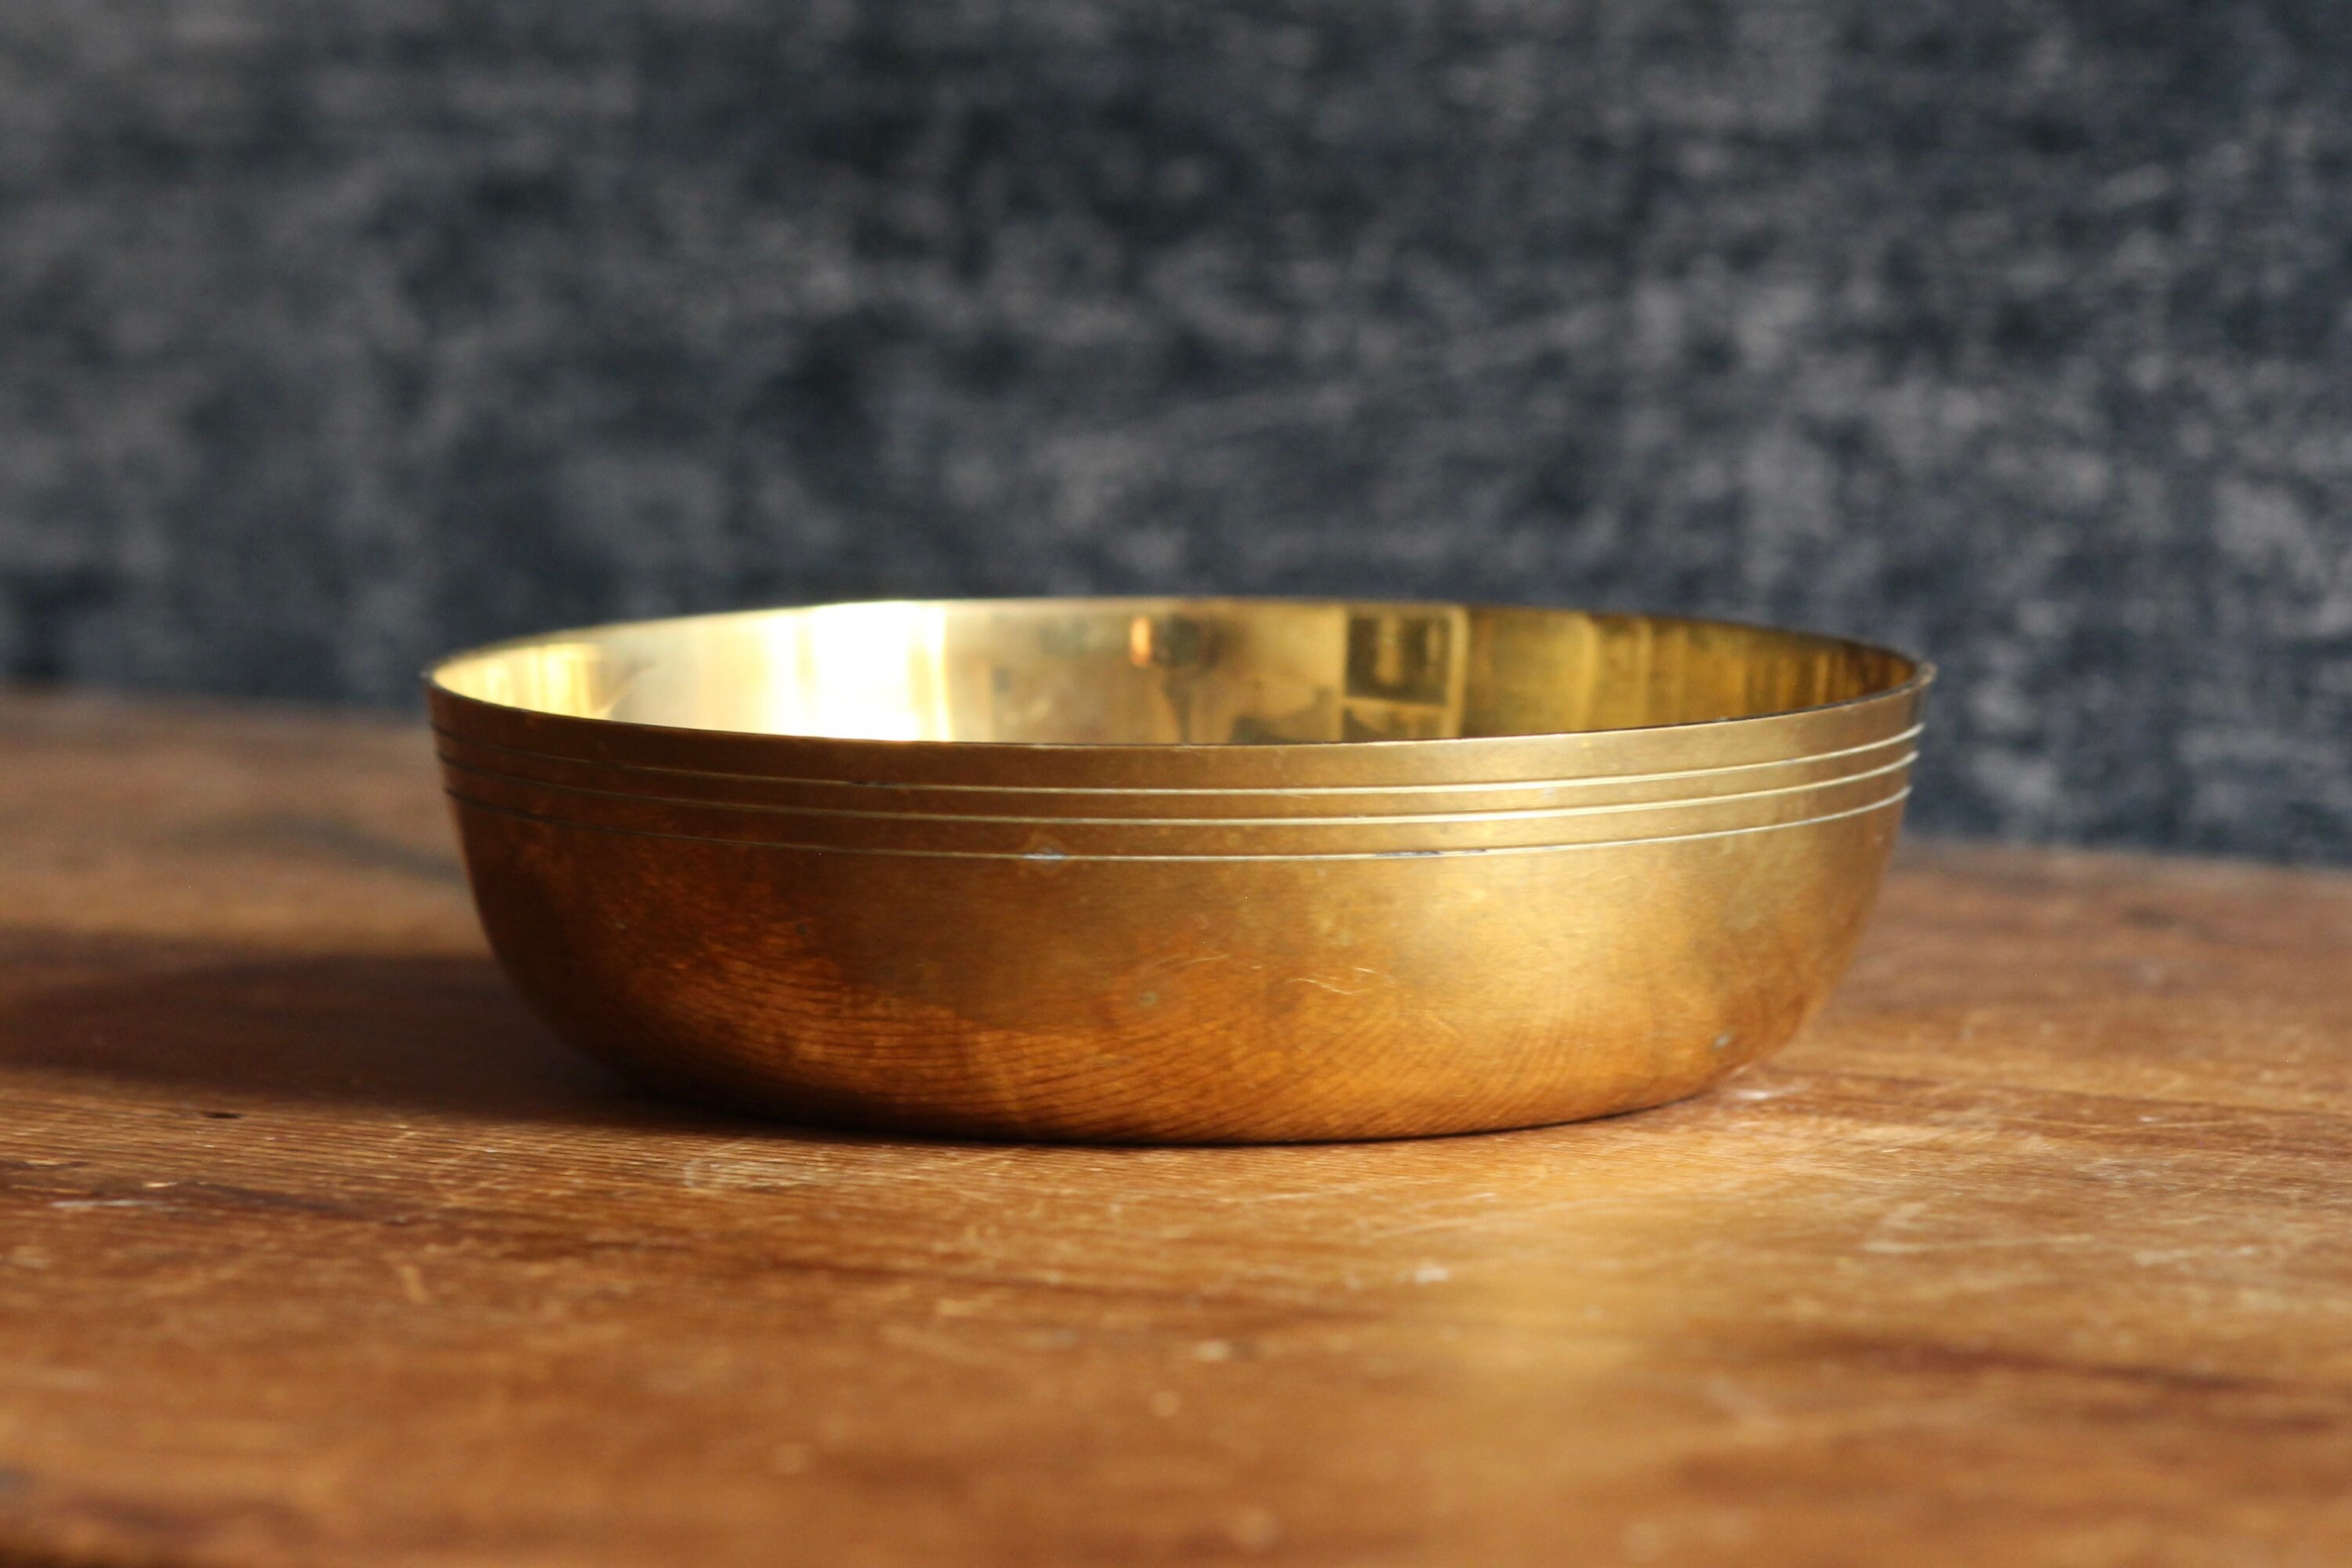 Gold De Kulture Works™ Hand Made Brass Bowls Set of 2-4.5X2 DH Inches 